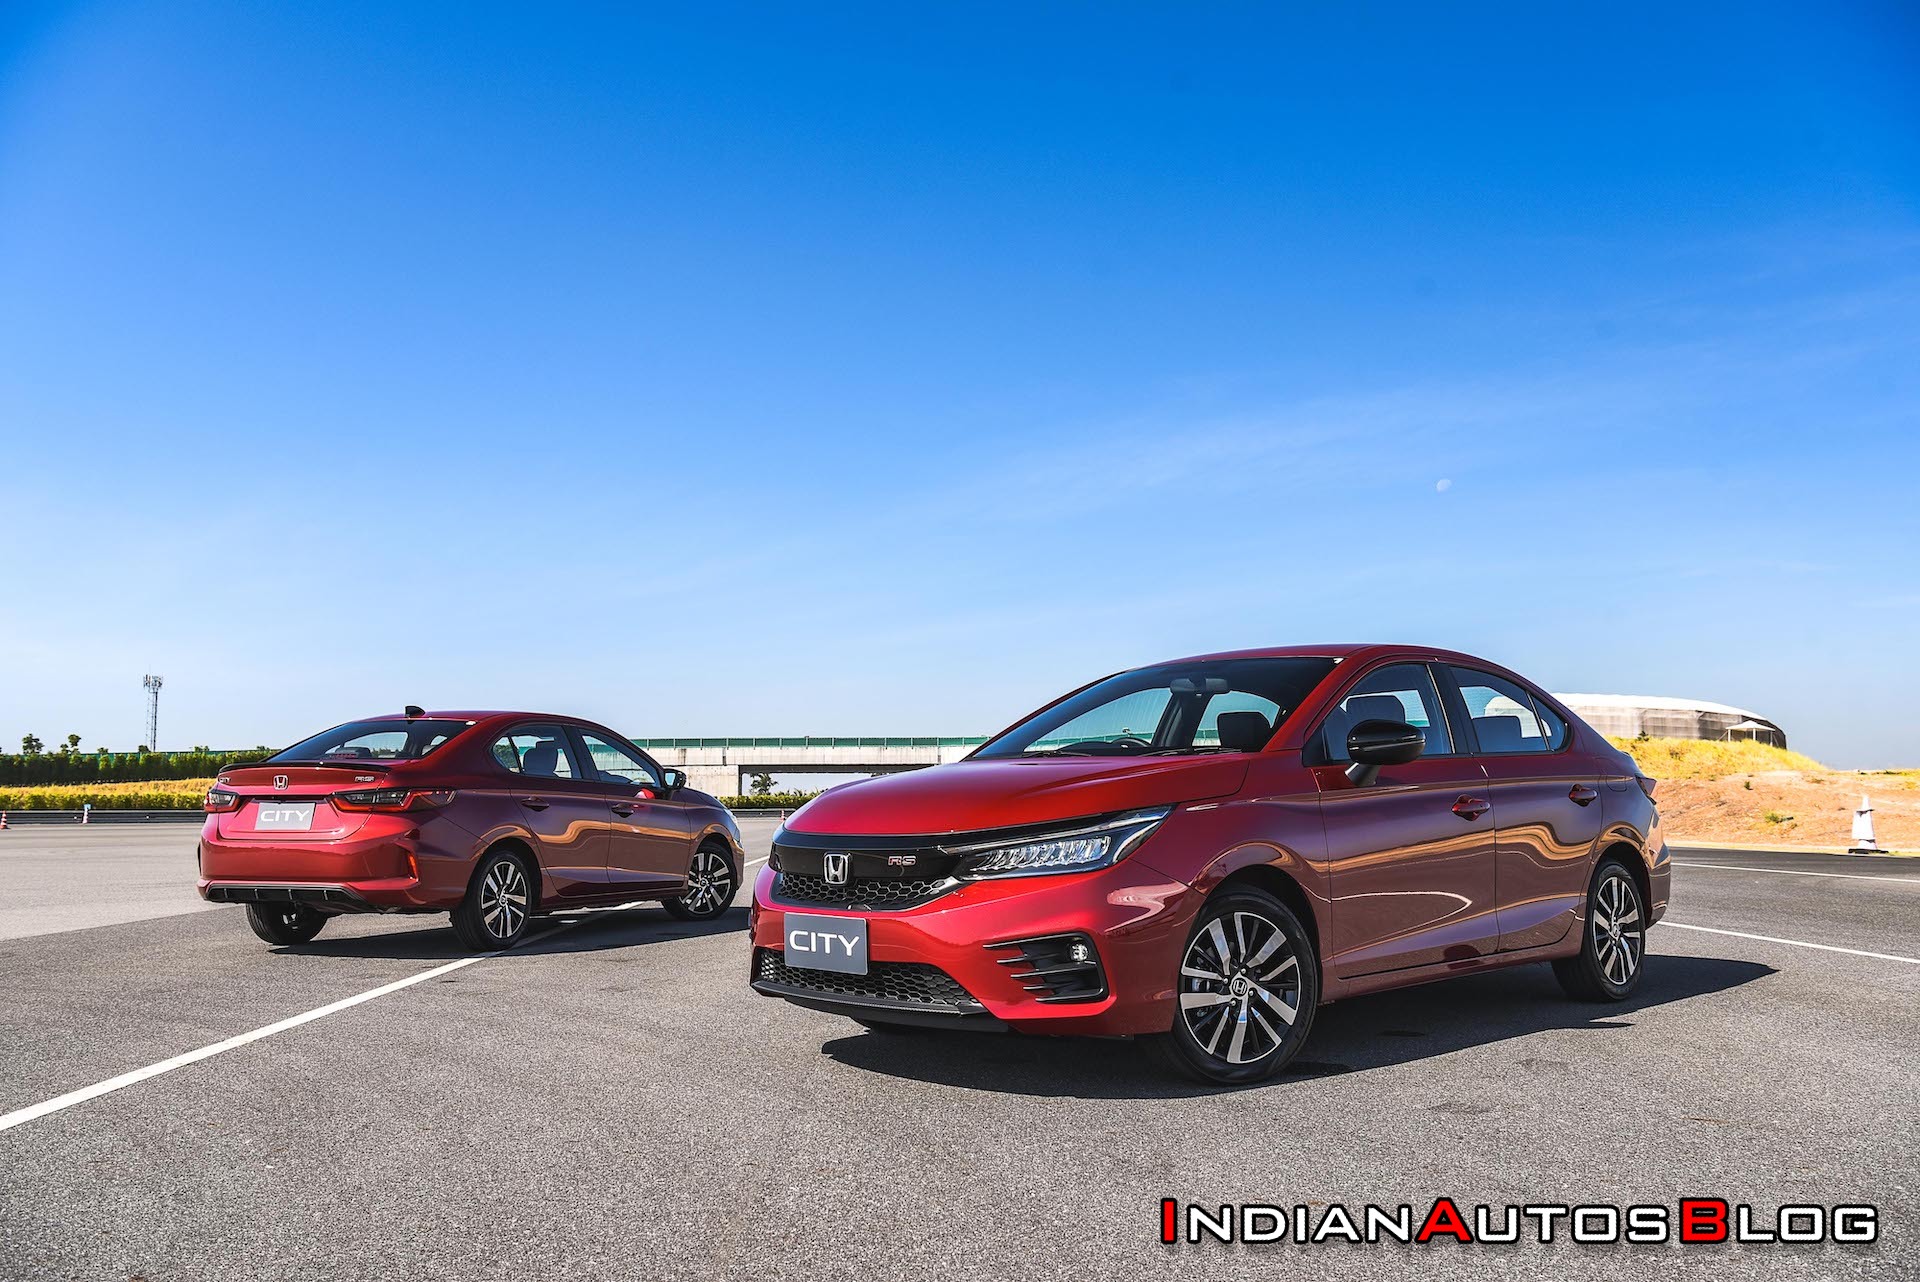 Honda City 2020 announced the price of just over 300 ...